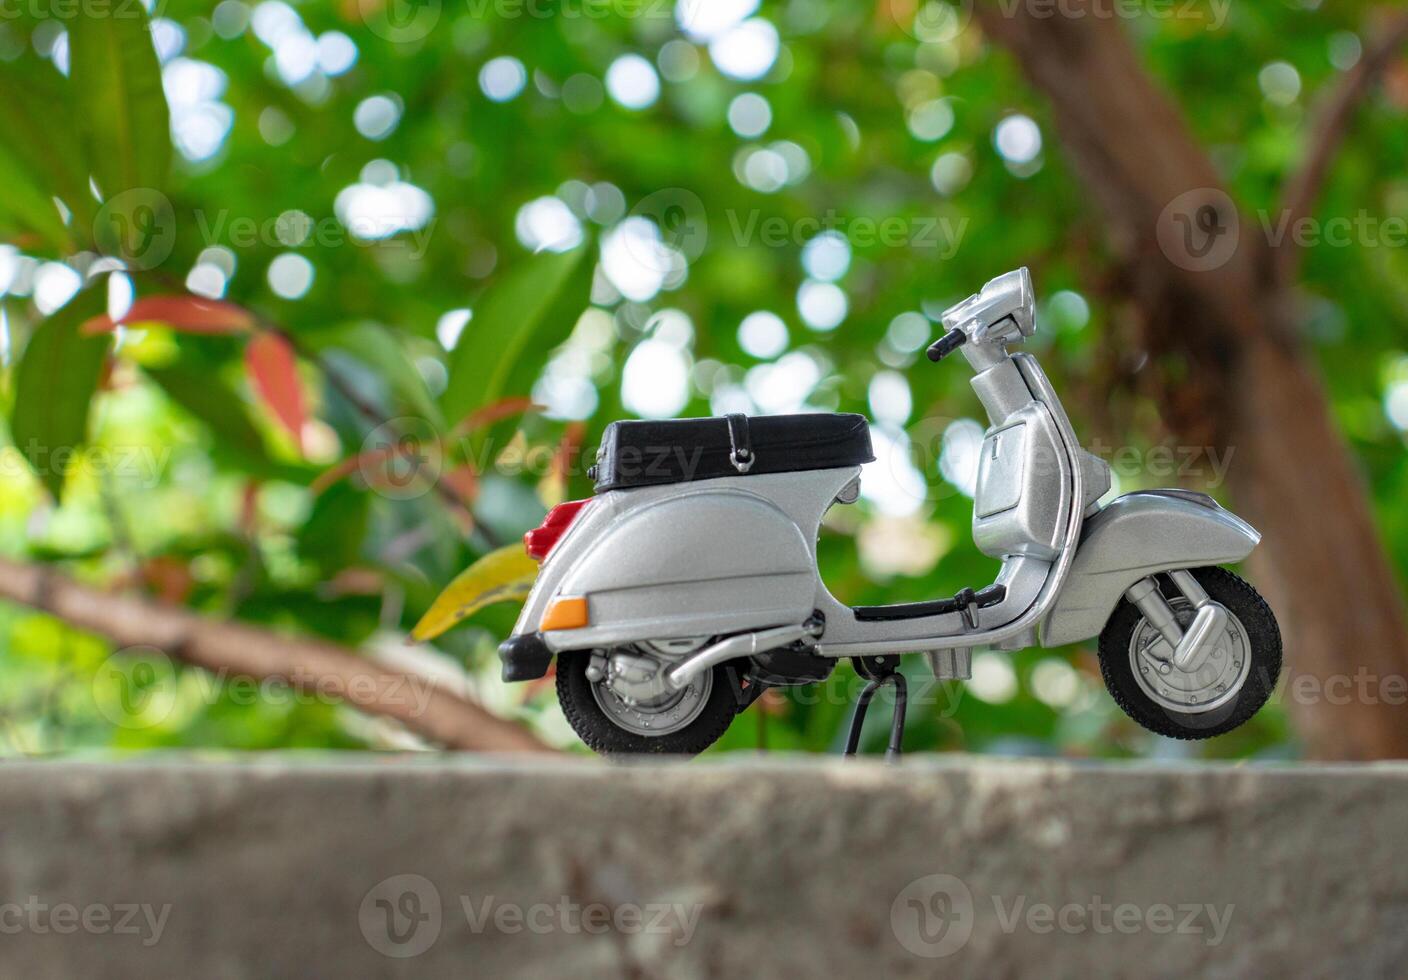 Miniature classic scooter on the cement floor with nature background. After some edits. photo